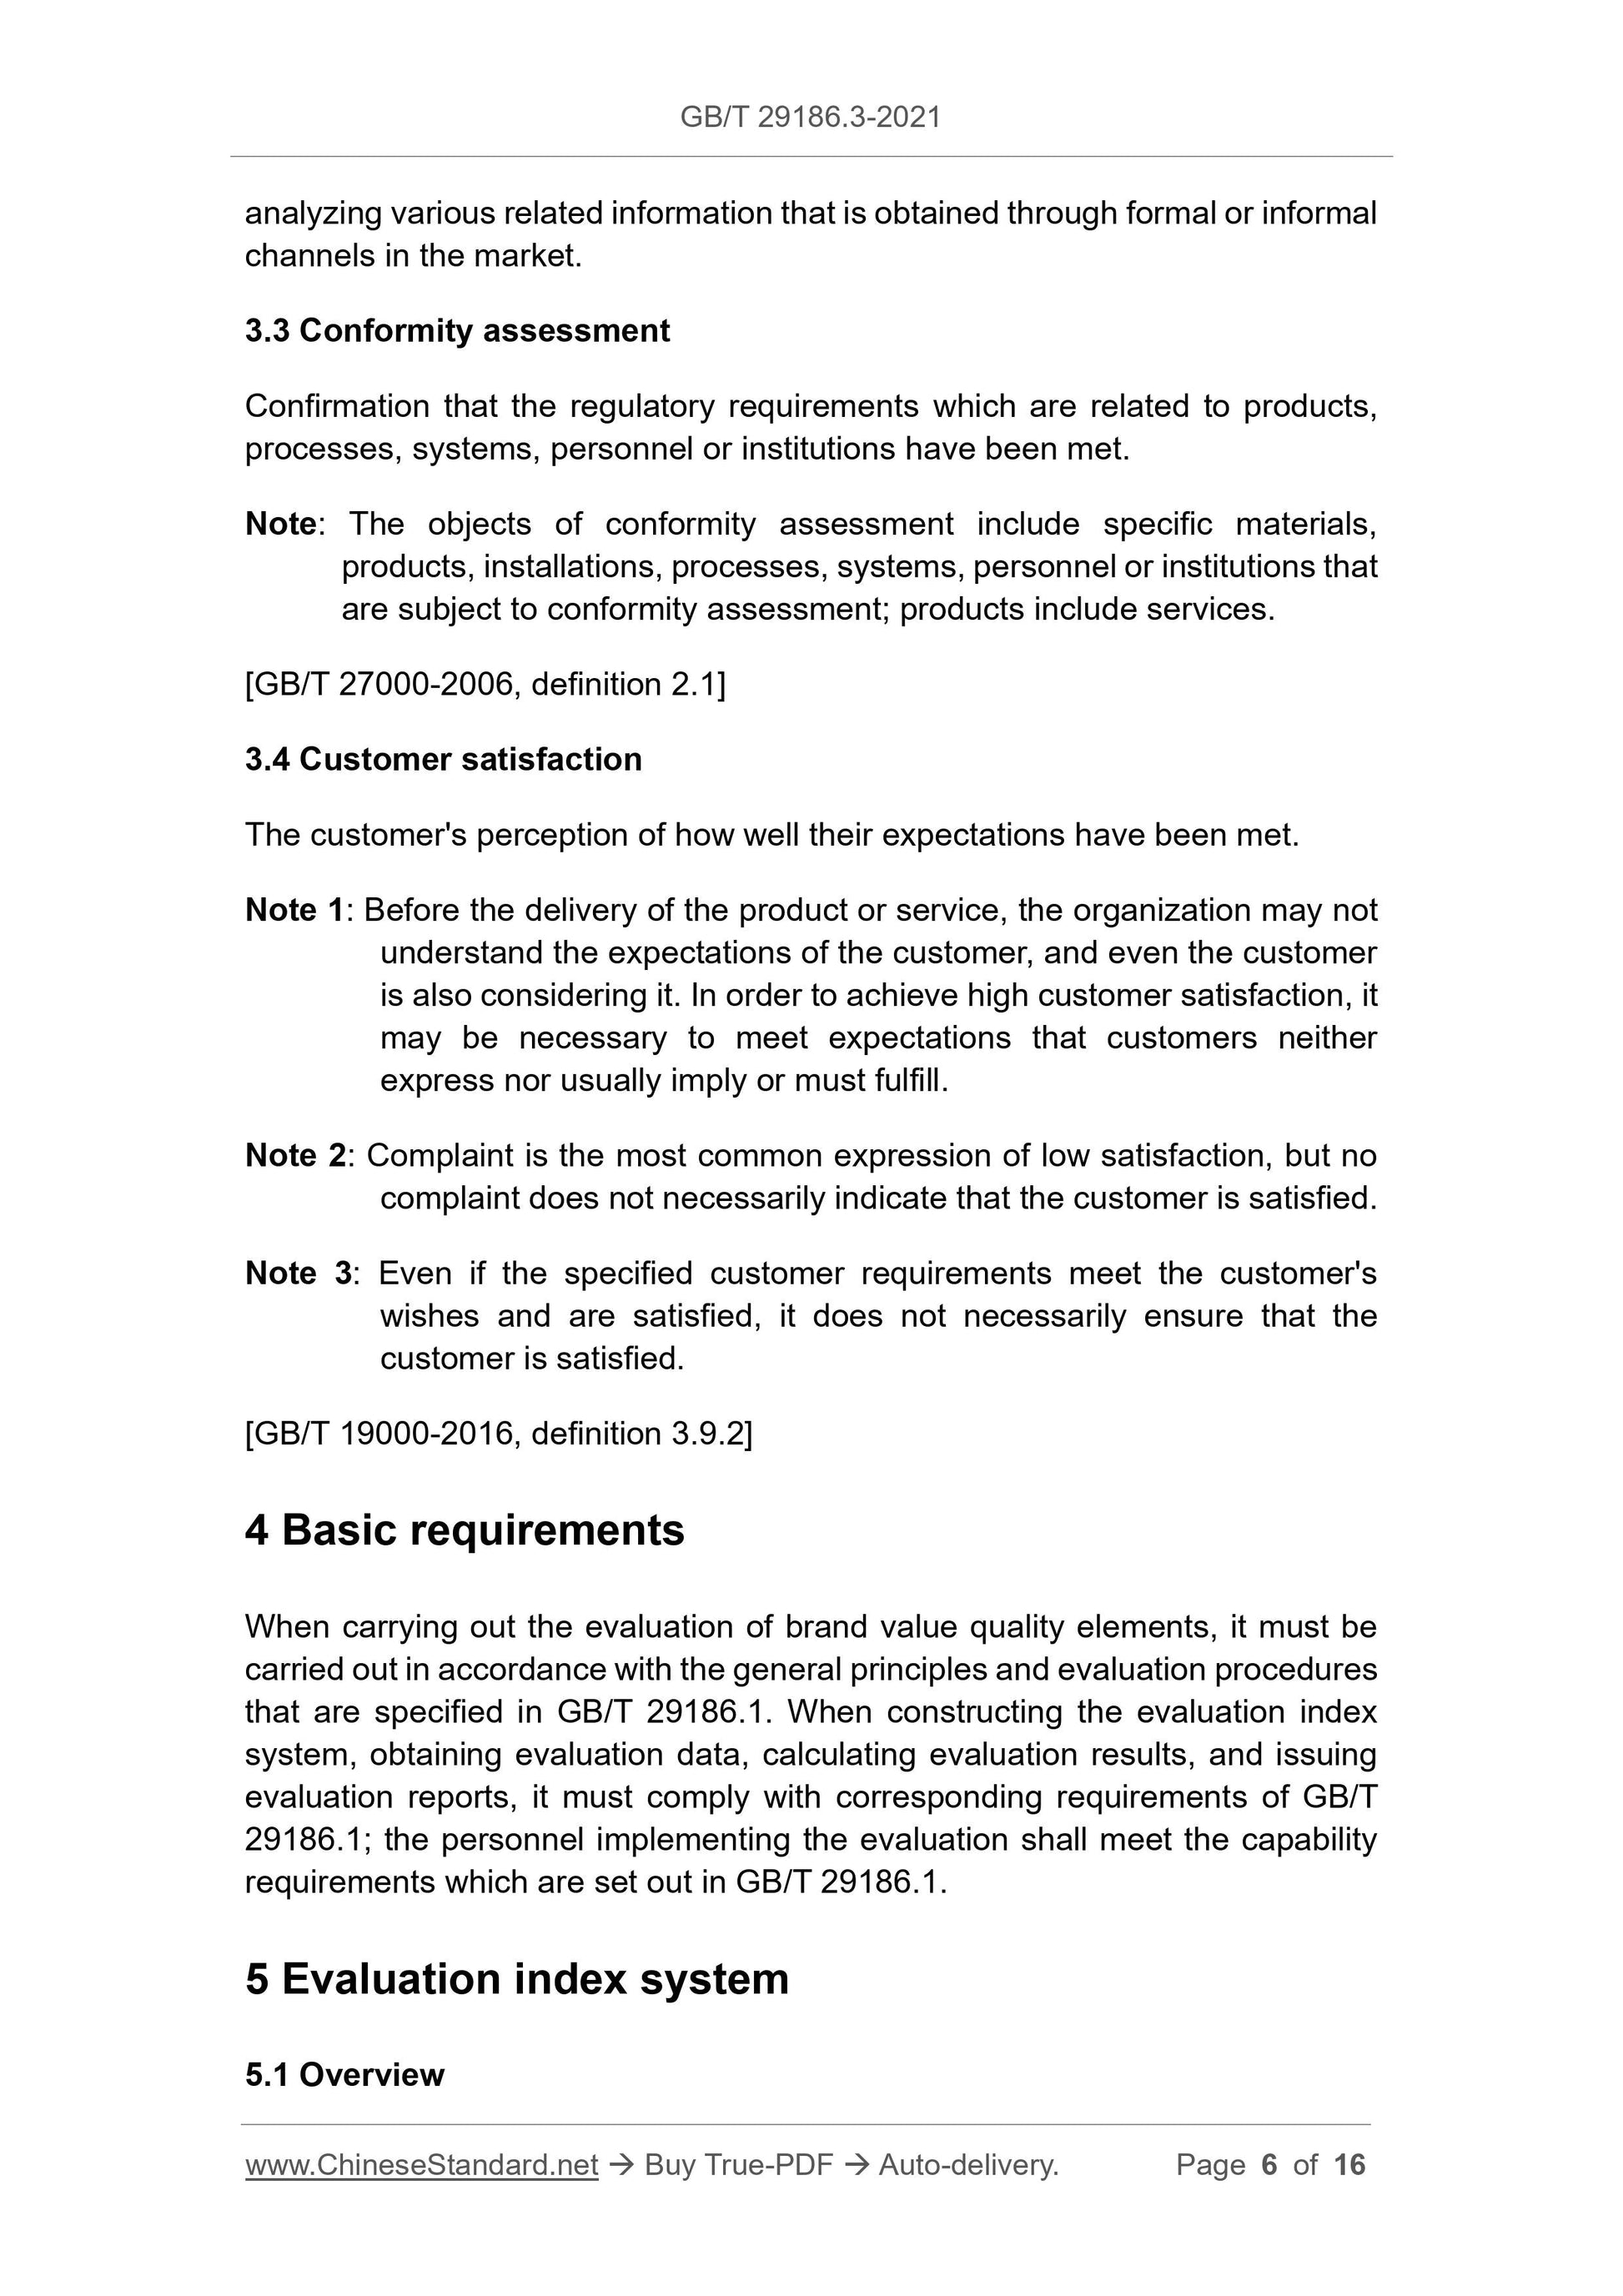 GB/T 29186.3-2021 Page 5